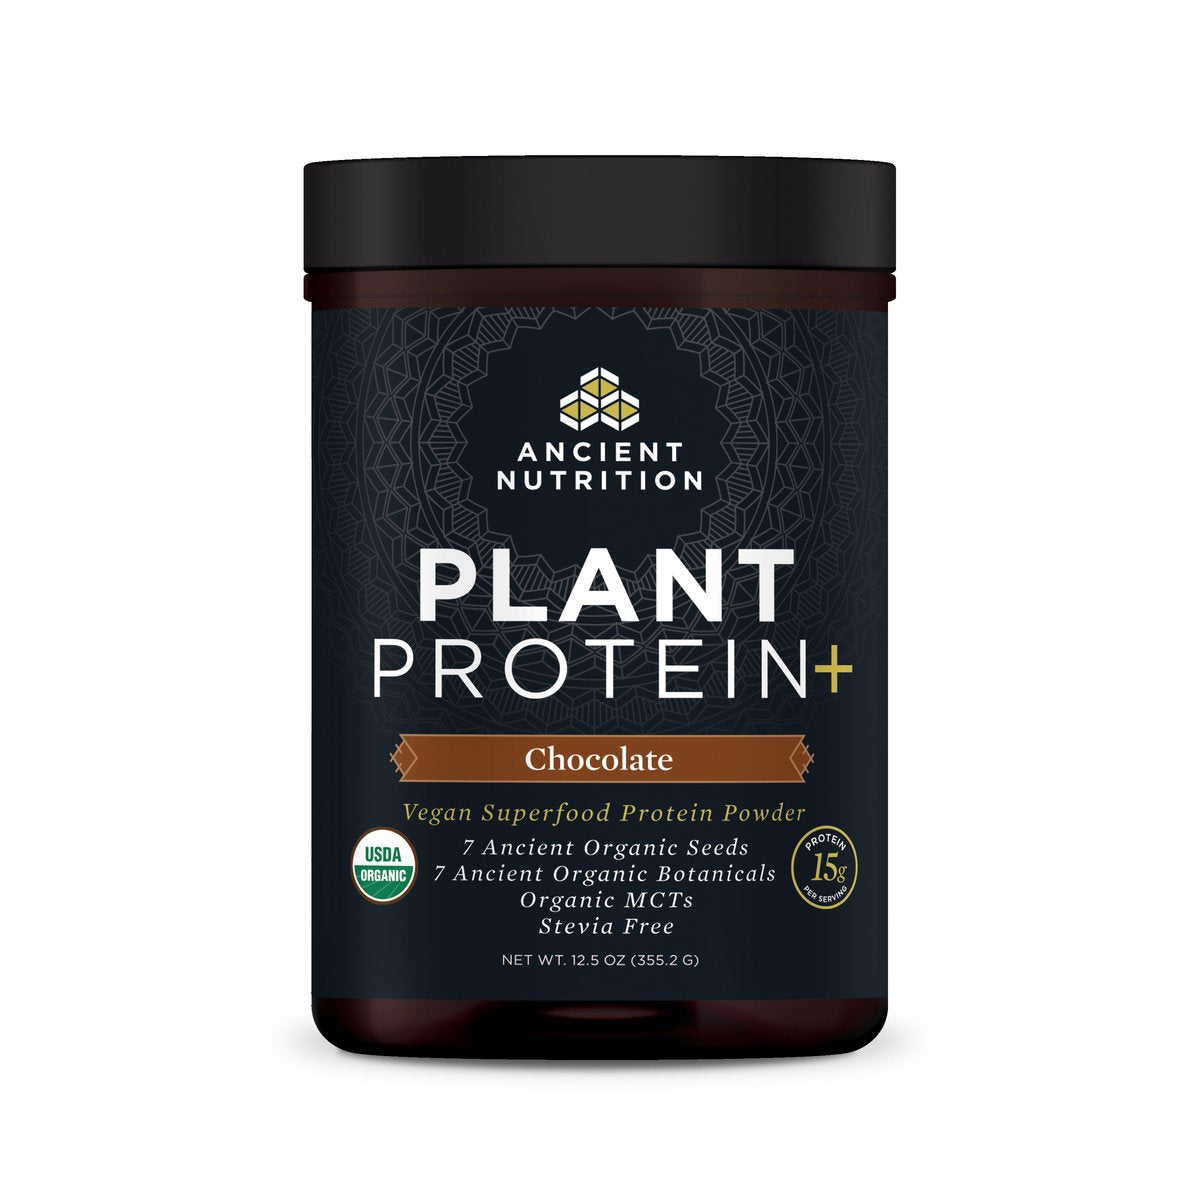 Plant Protein+ Chocolate Ancient Nutrition